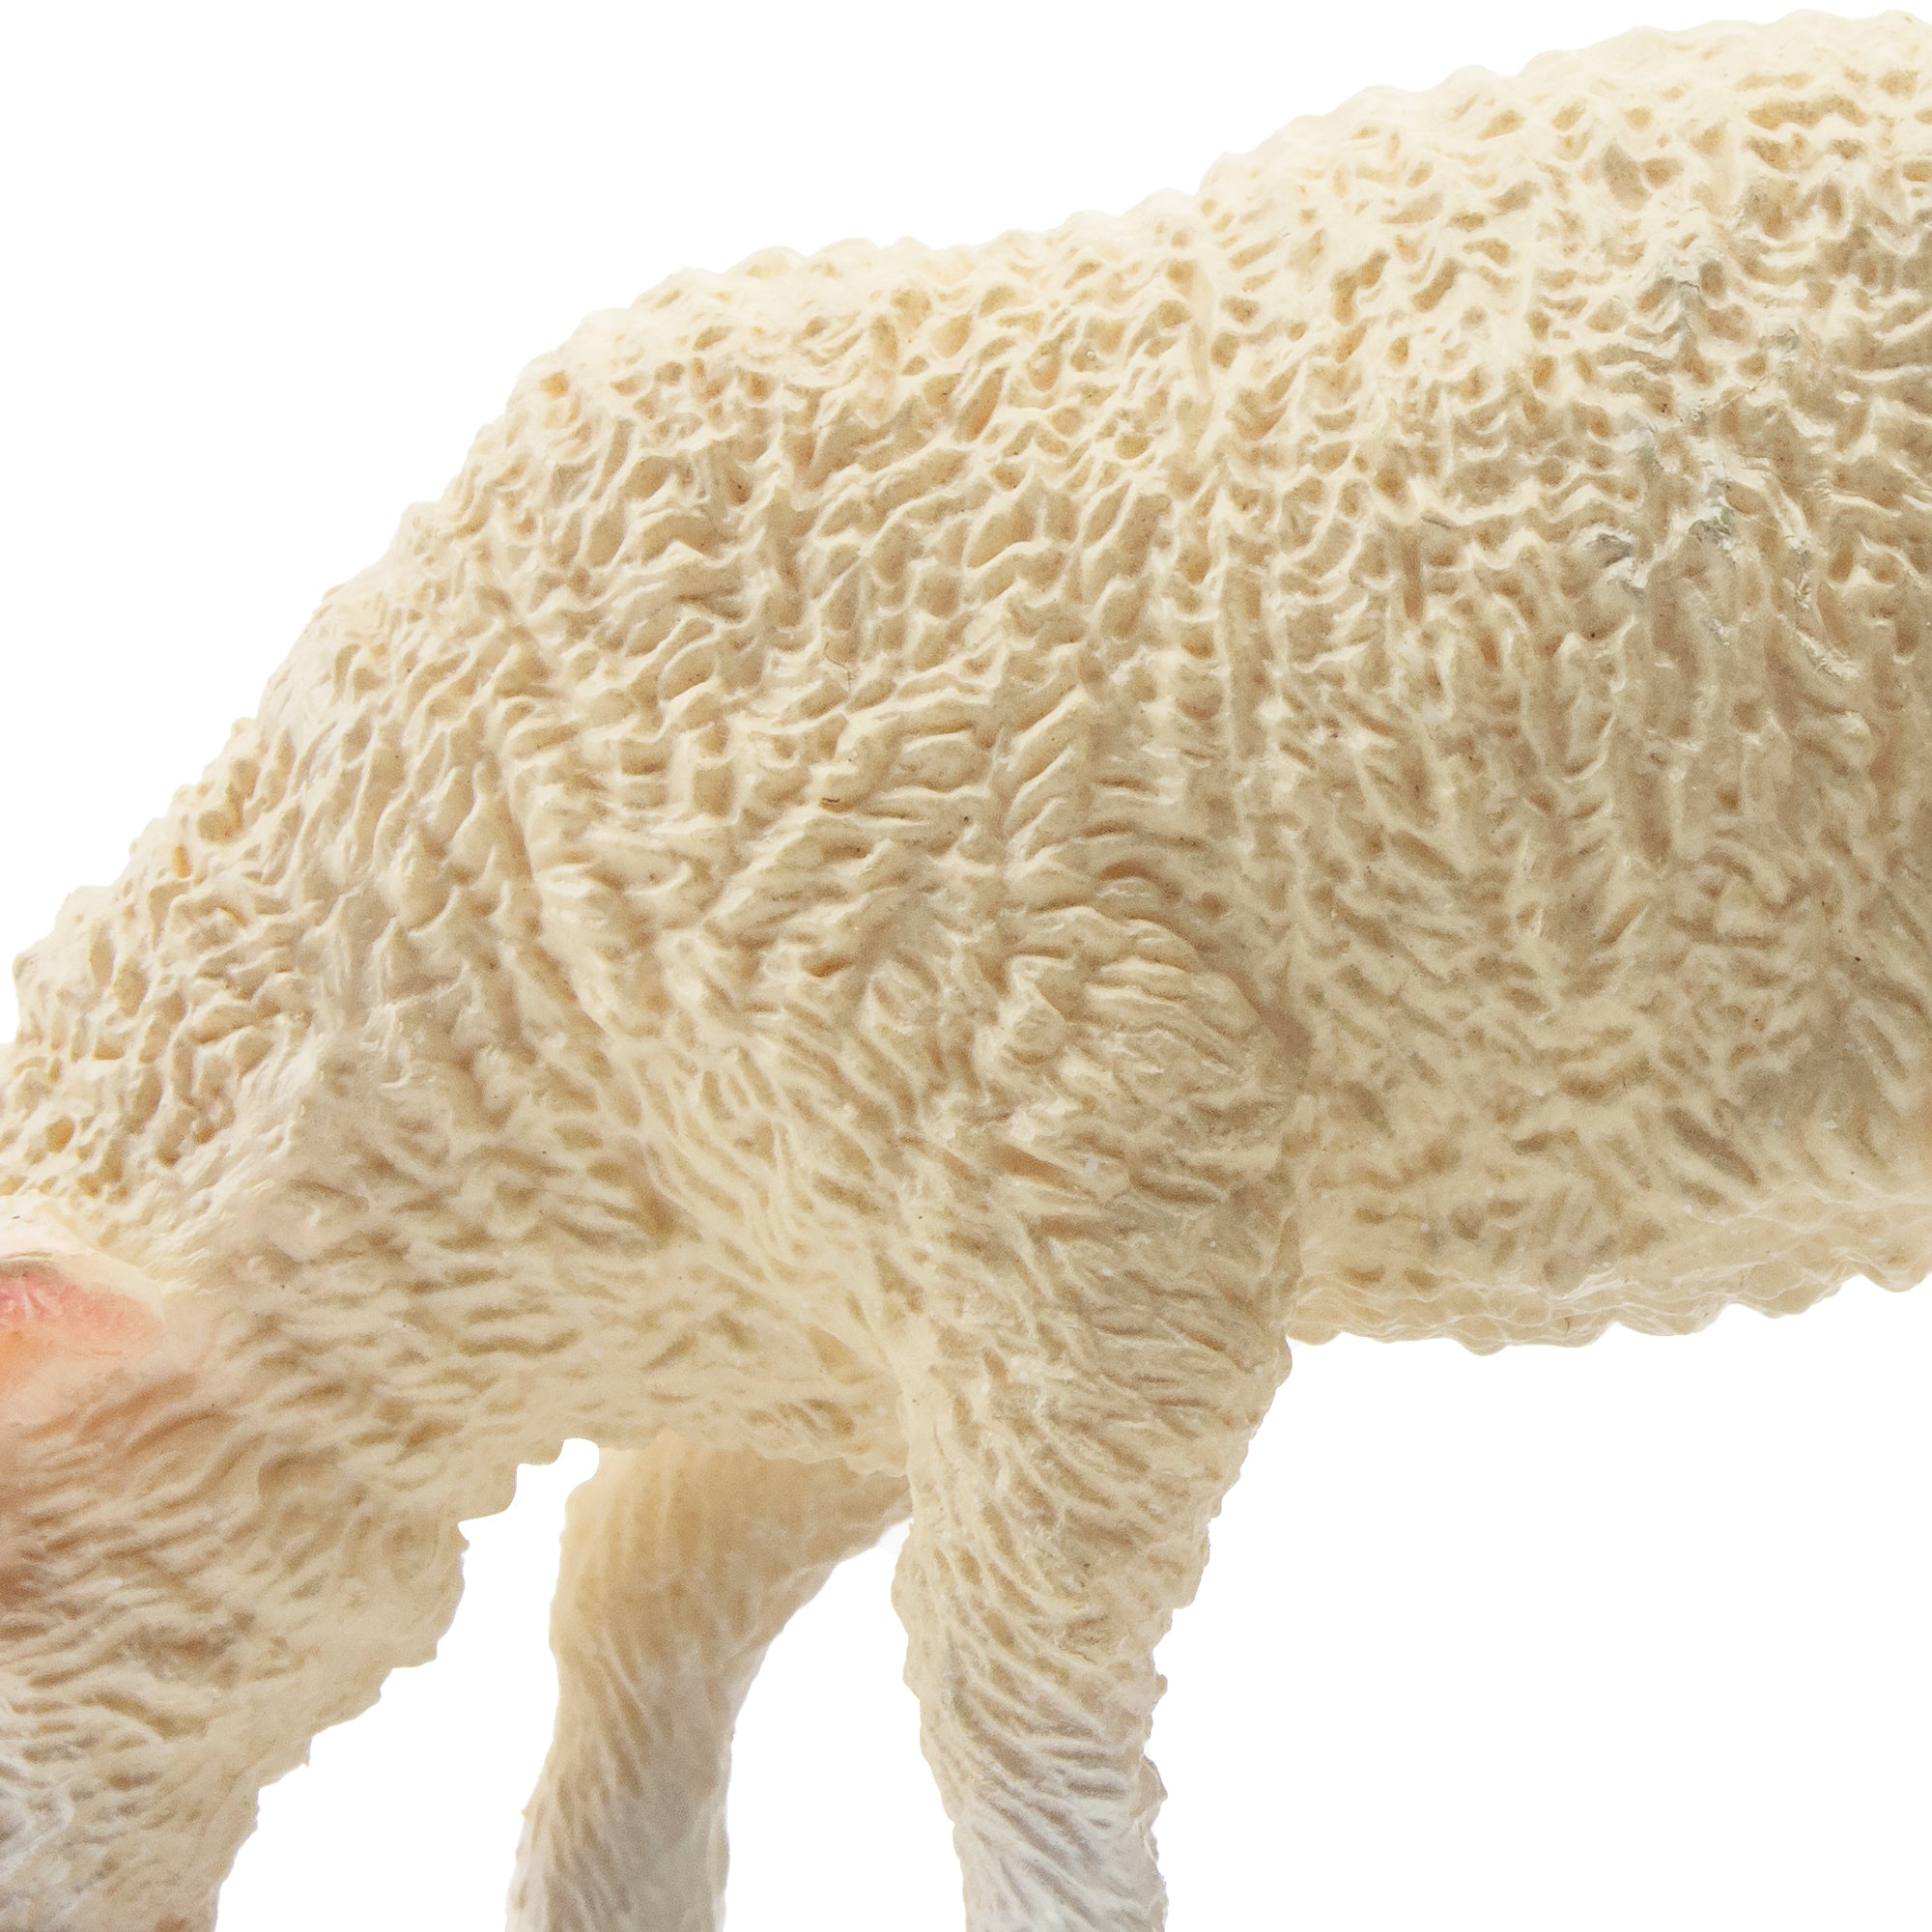 Toymany Foraging Light-Haired Lamb Figurine Toy-detail